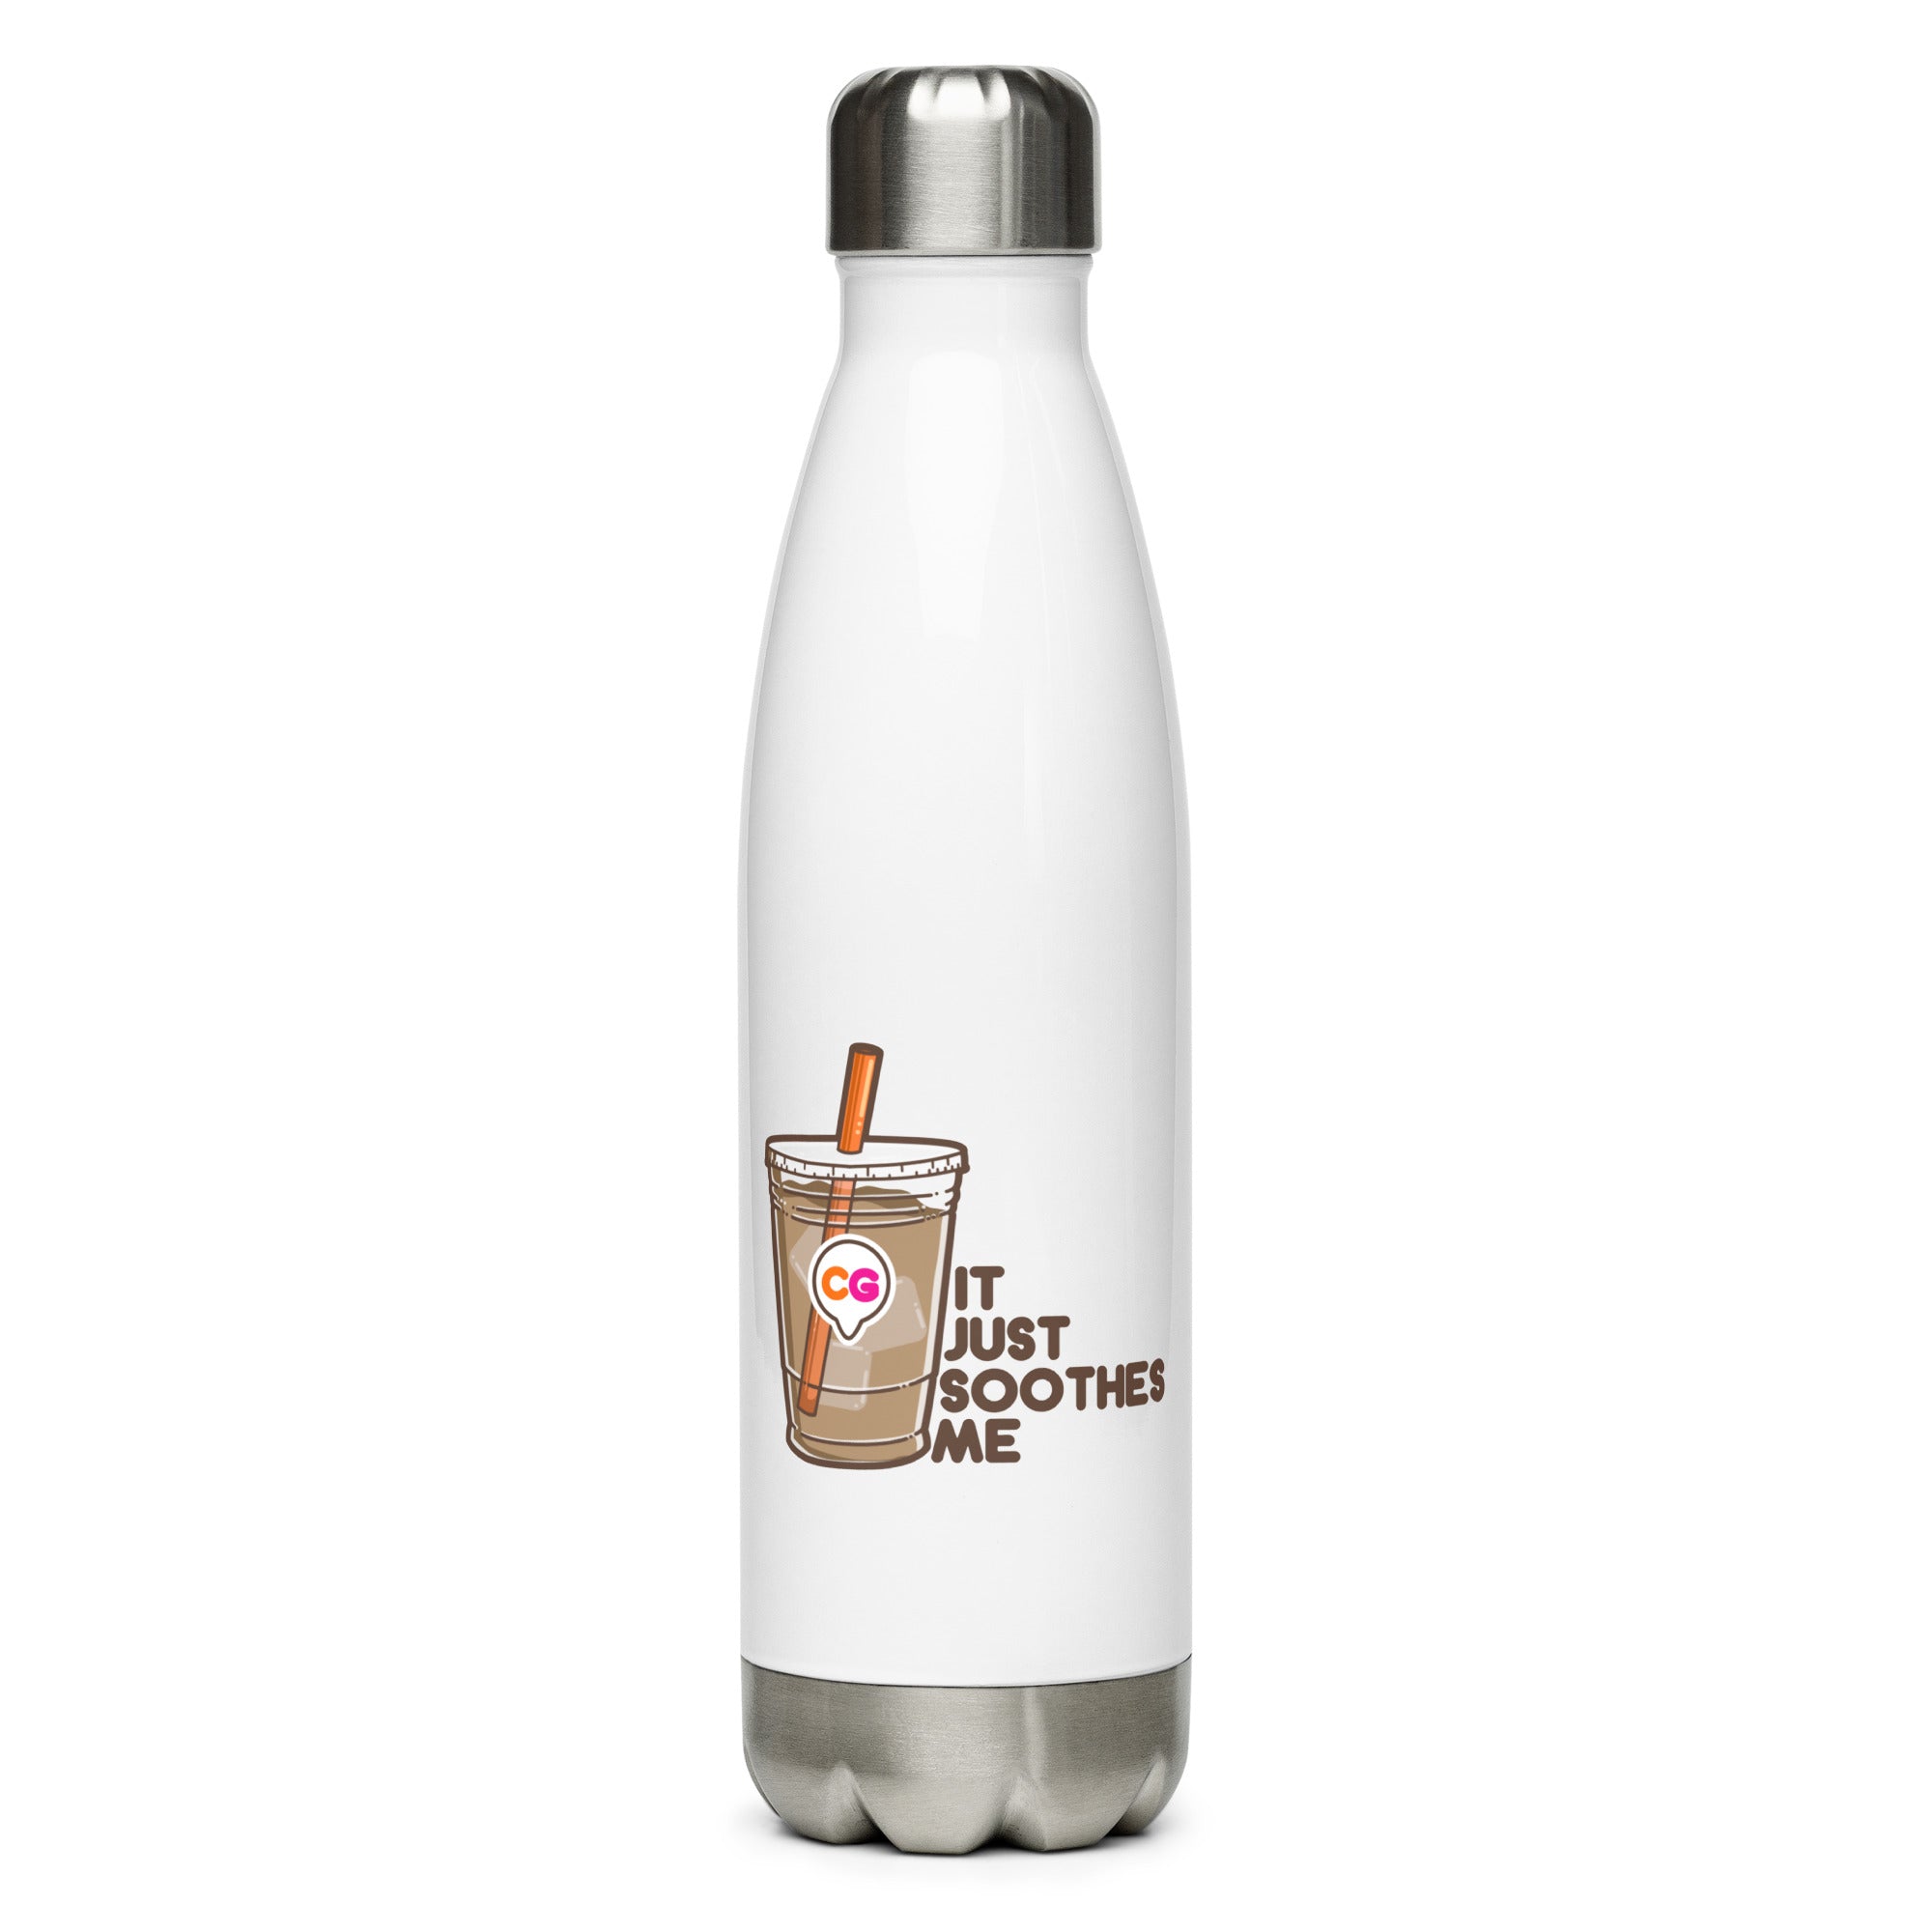 IT JUST SOOTHES ME  - Stainless Steel Water Bottle - ChubbleGumLLC